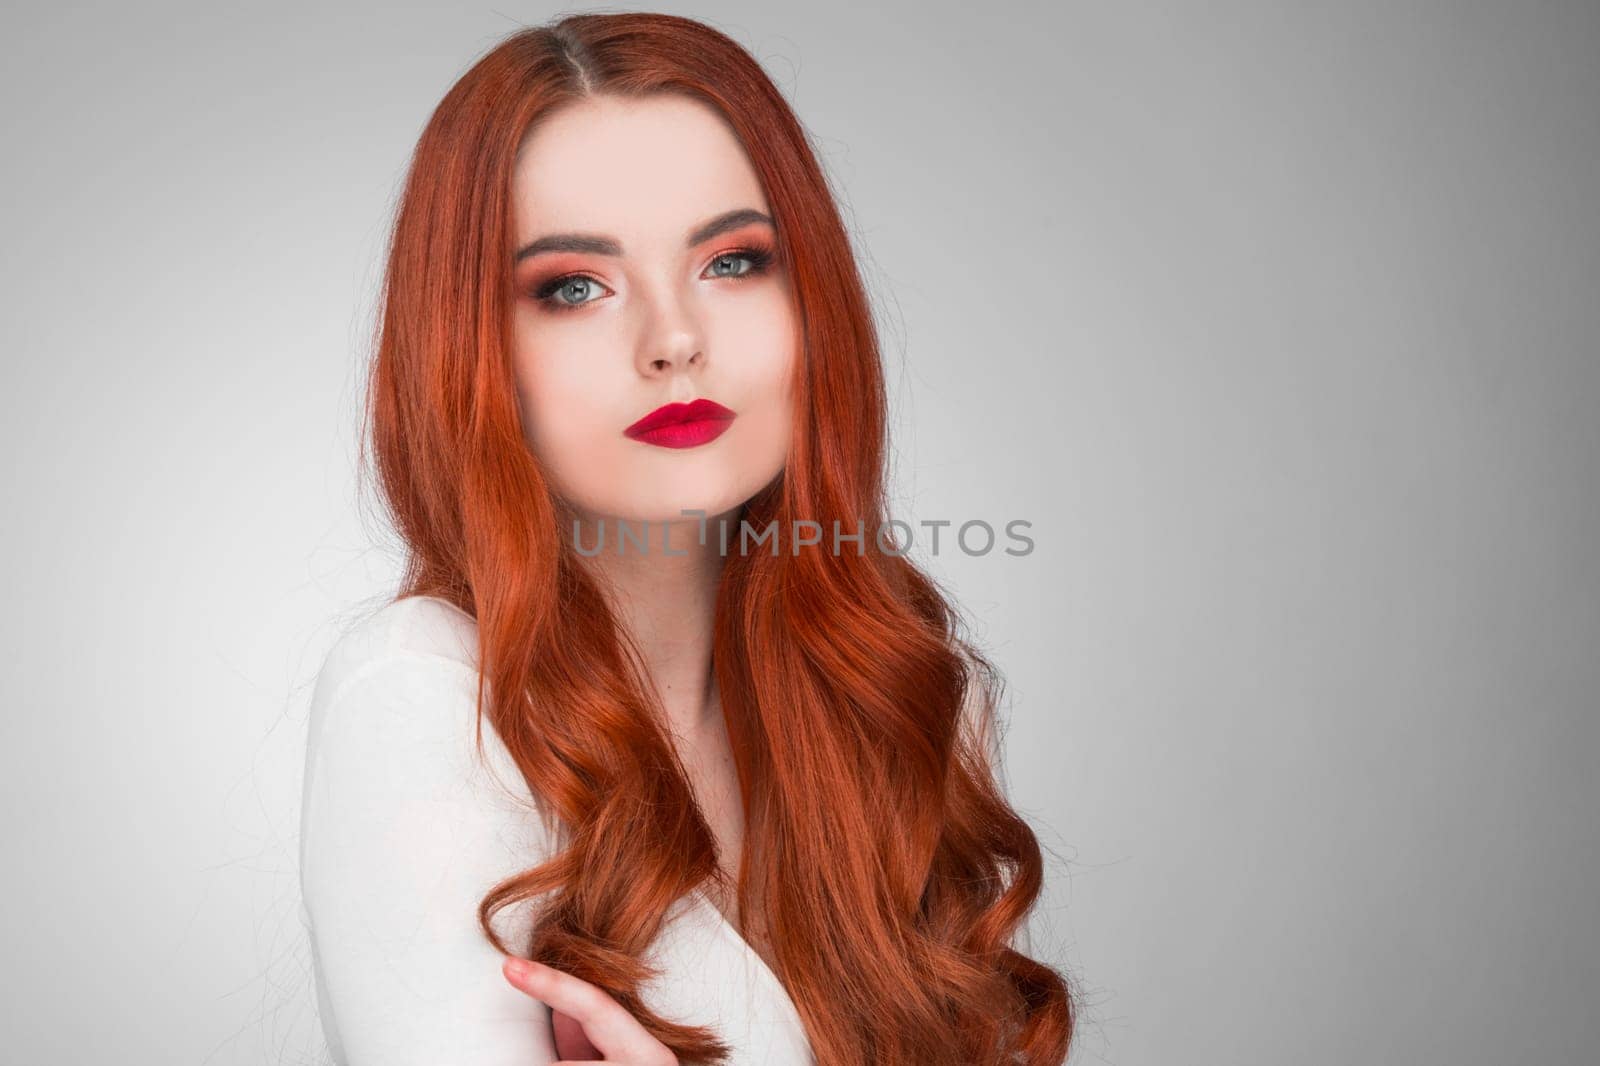 Beautiful Woman with Red Hair and bright makeup